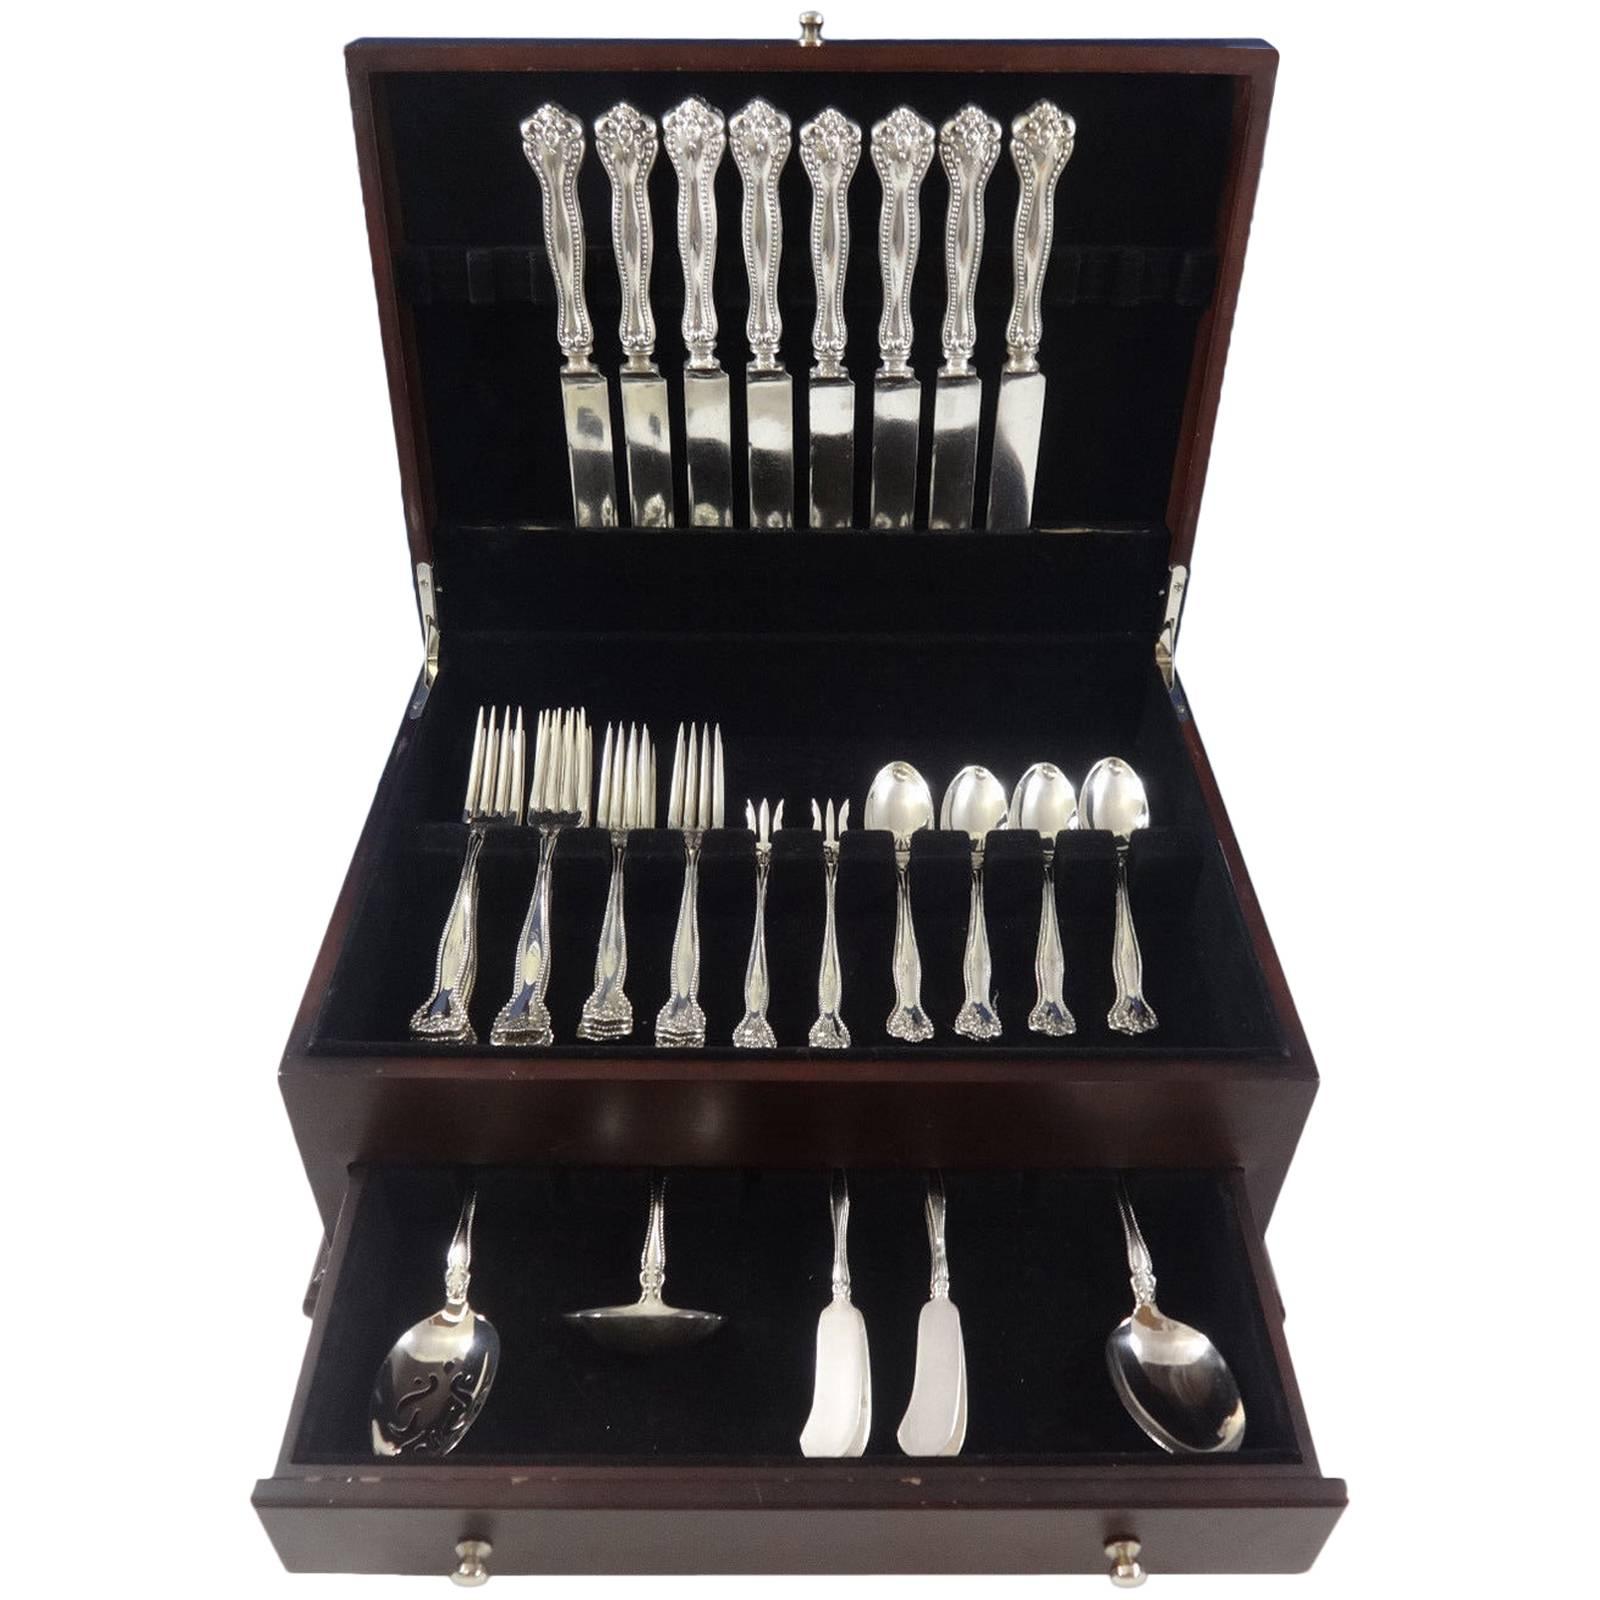 Rare Raleigh by Alvin sterling silver dinner size flatware set - 51 pieces. This set includes: 

Eight dinner knives, 9 5/8